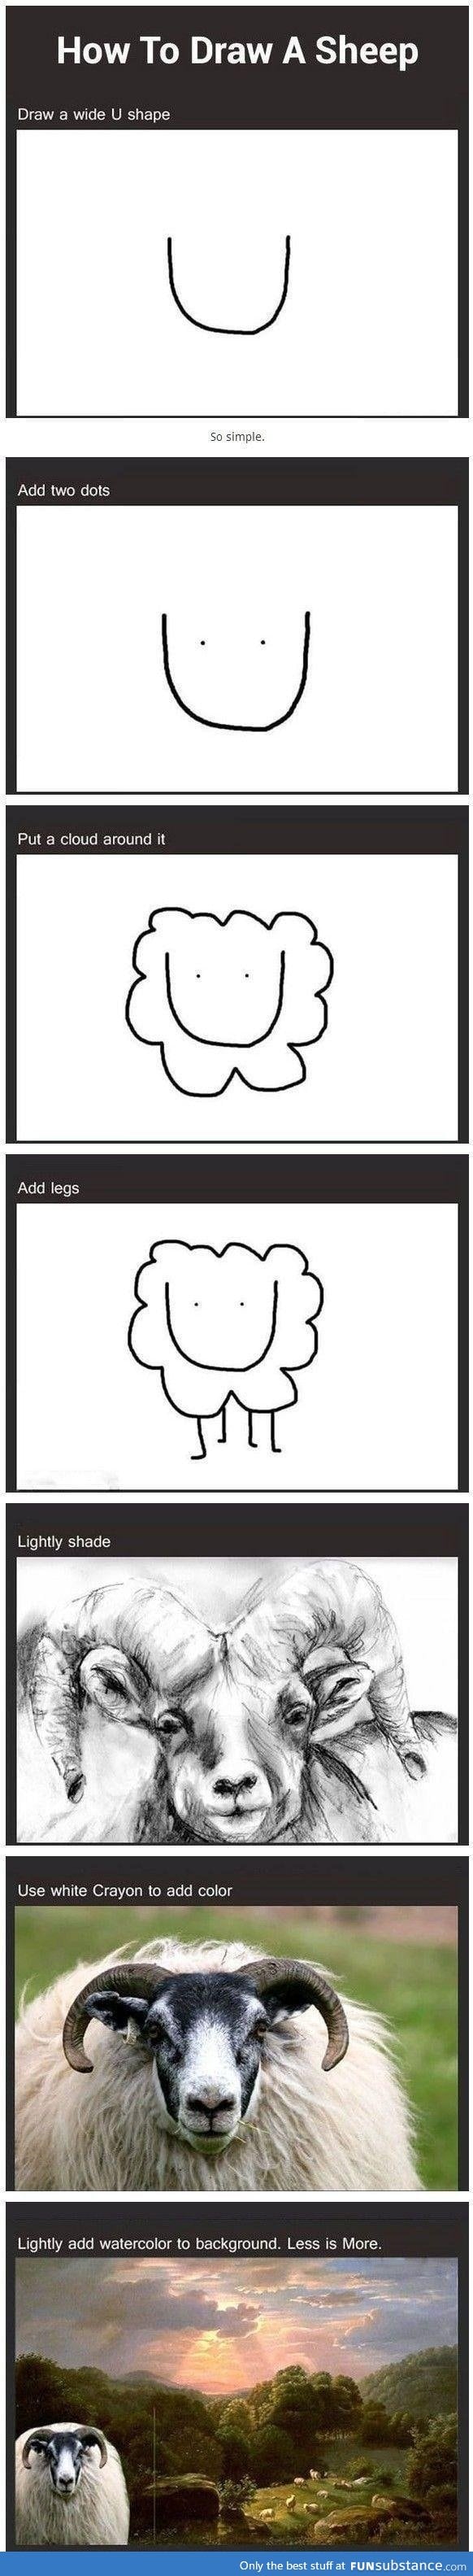 How to draw sheep